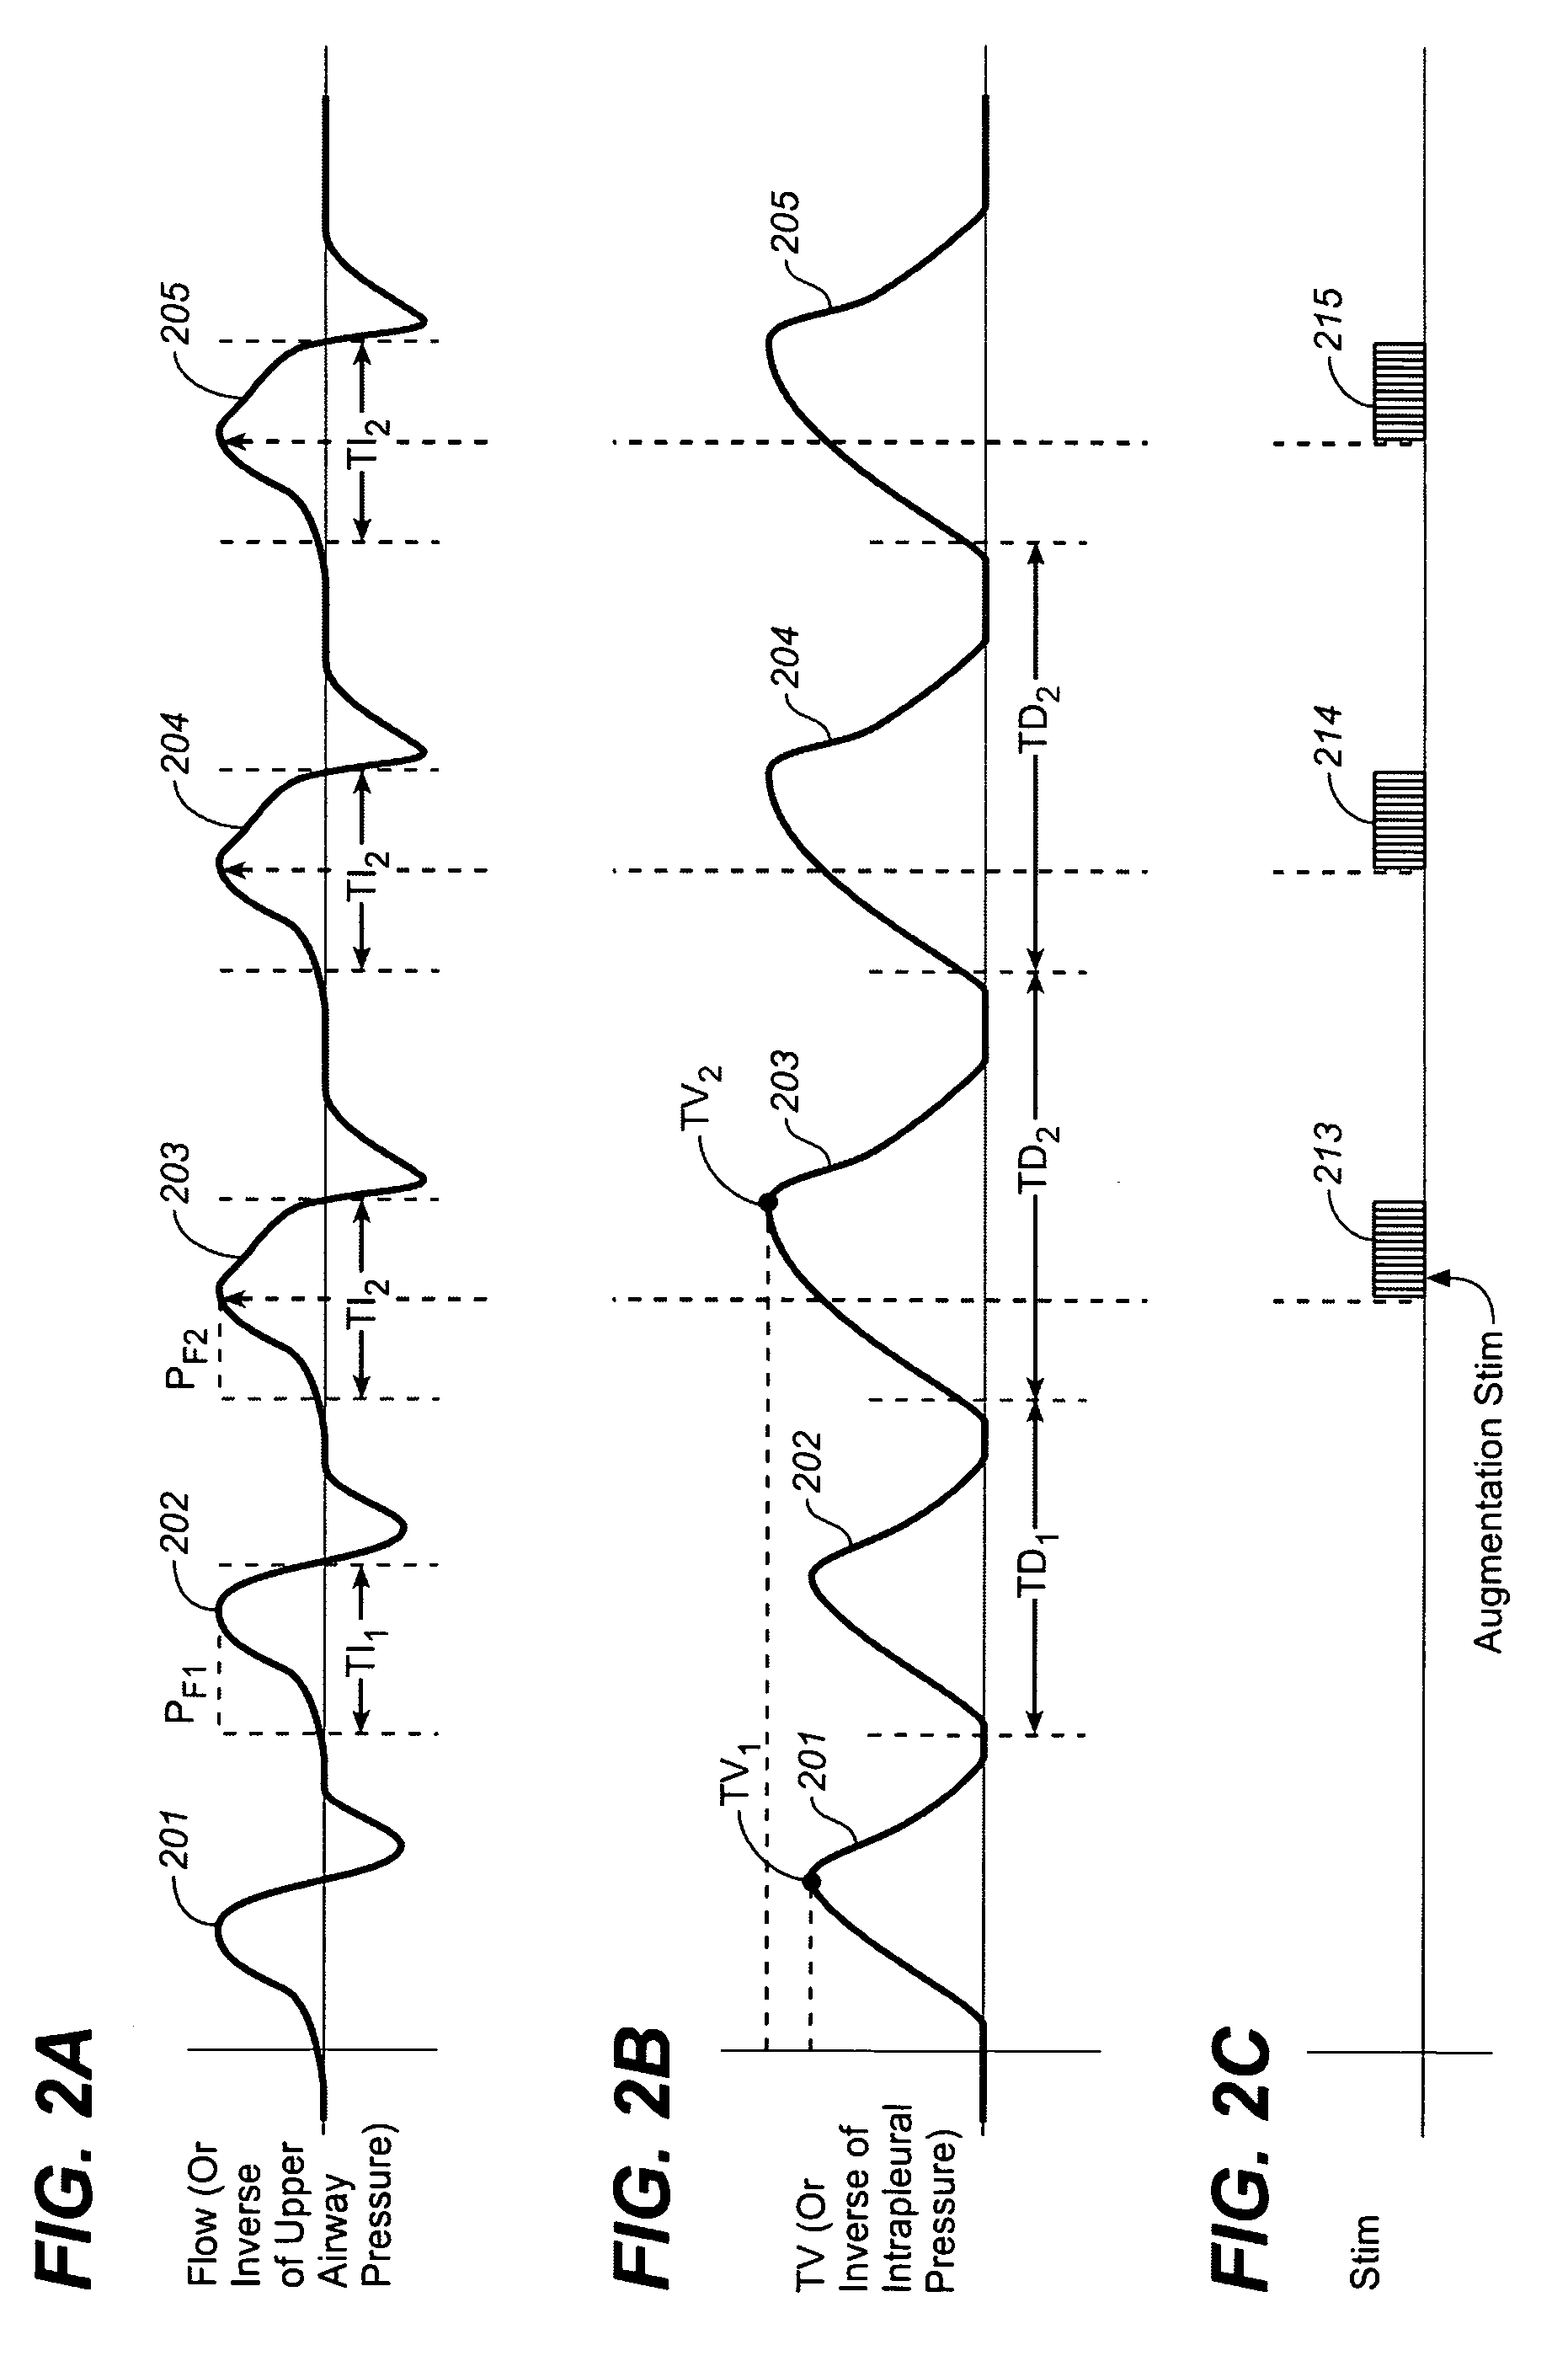 Device and method for treating disorders of the cardiovascular system or heart